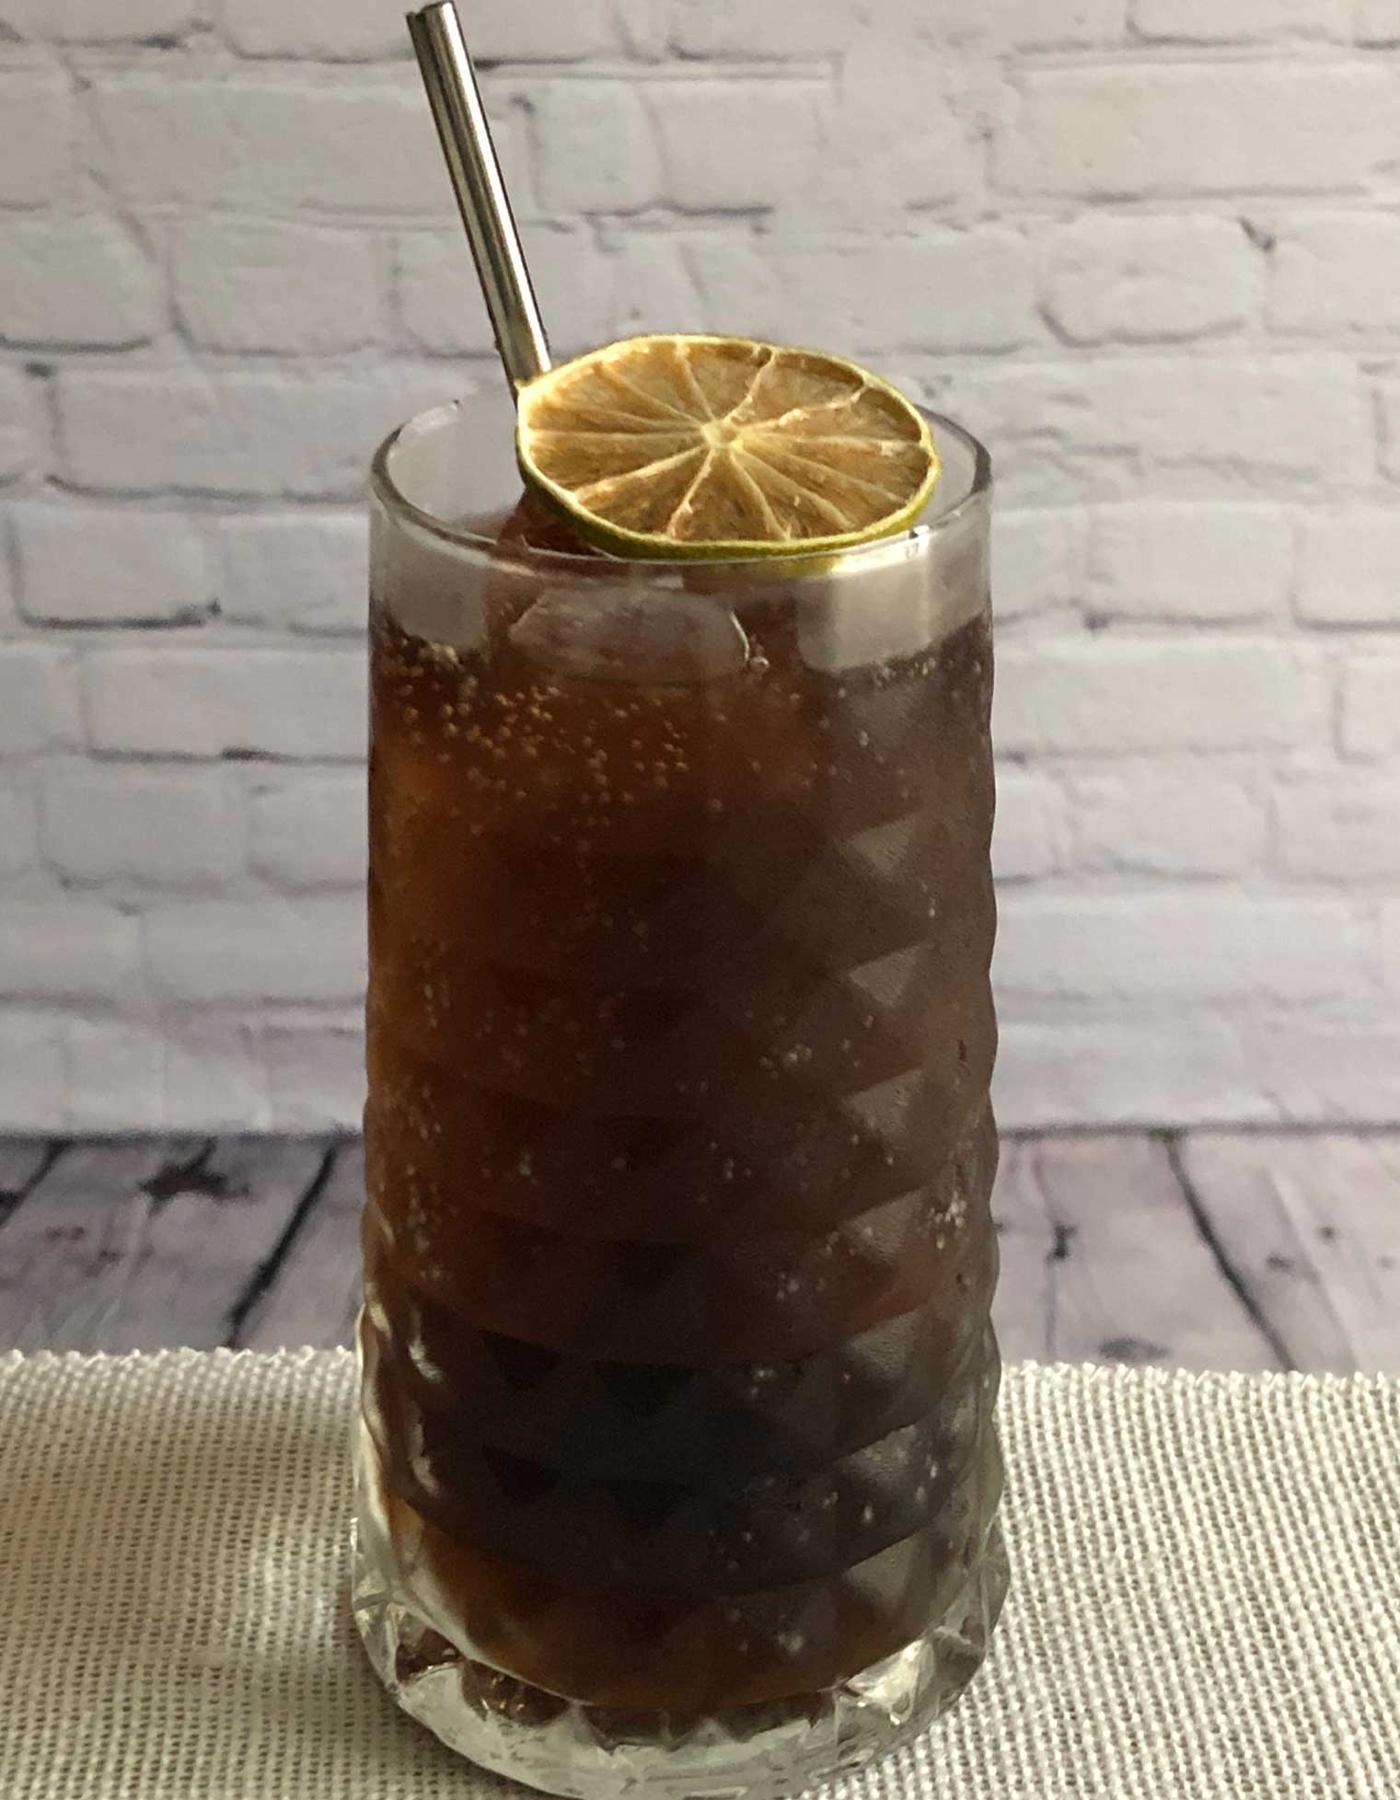 An example of the Cuba Libre, the mixed drink (drink) featuring cola, The Scarlet Ibis Trinidad Rum, lime juice, and Angostura bitters; photo by Lee Edwards